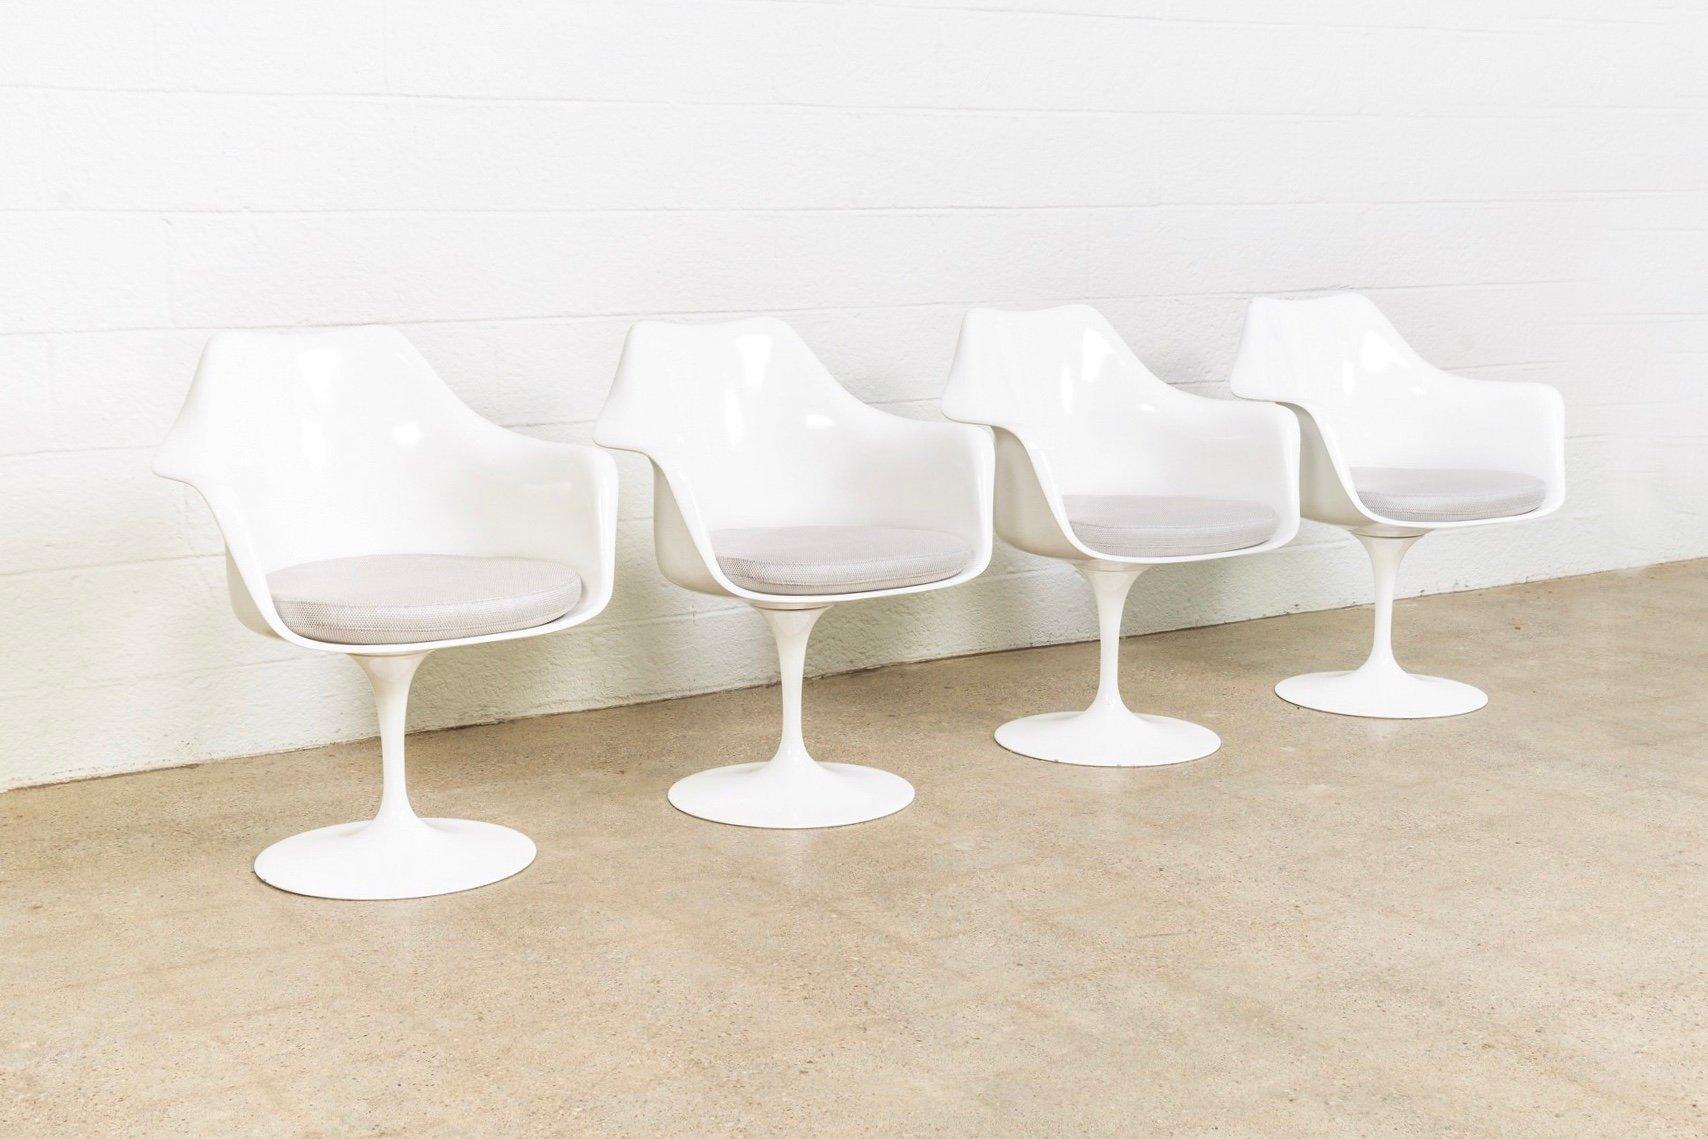 This set of 4 vintage mid century modern Model 150 tulip chairs was designed by Eero Saarinen and manufactured by Knoll. This iconic set of armchairs features a white molded lacquered fiberglass seat form on a 360 degree swivel cast aluminum